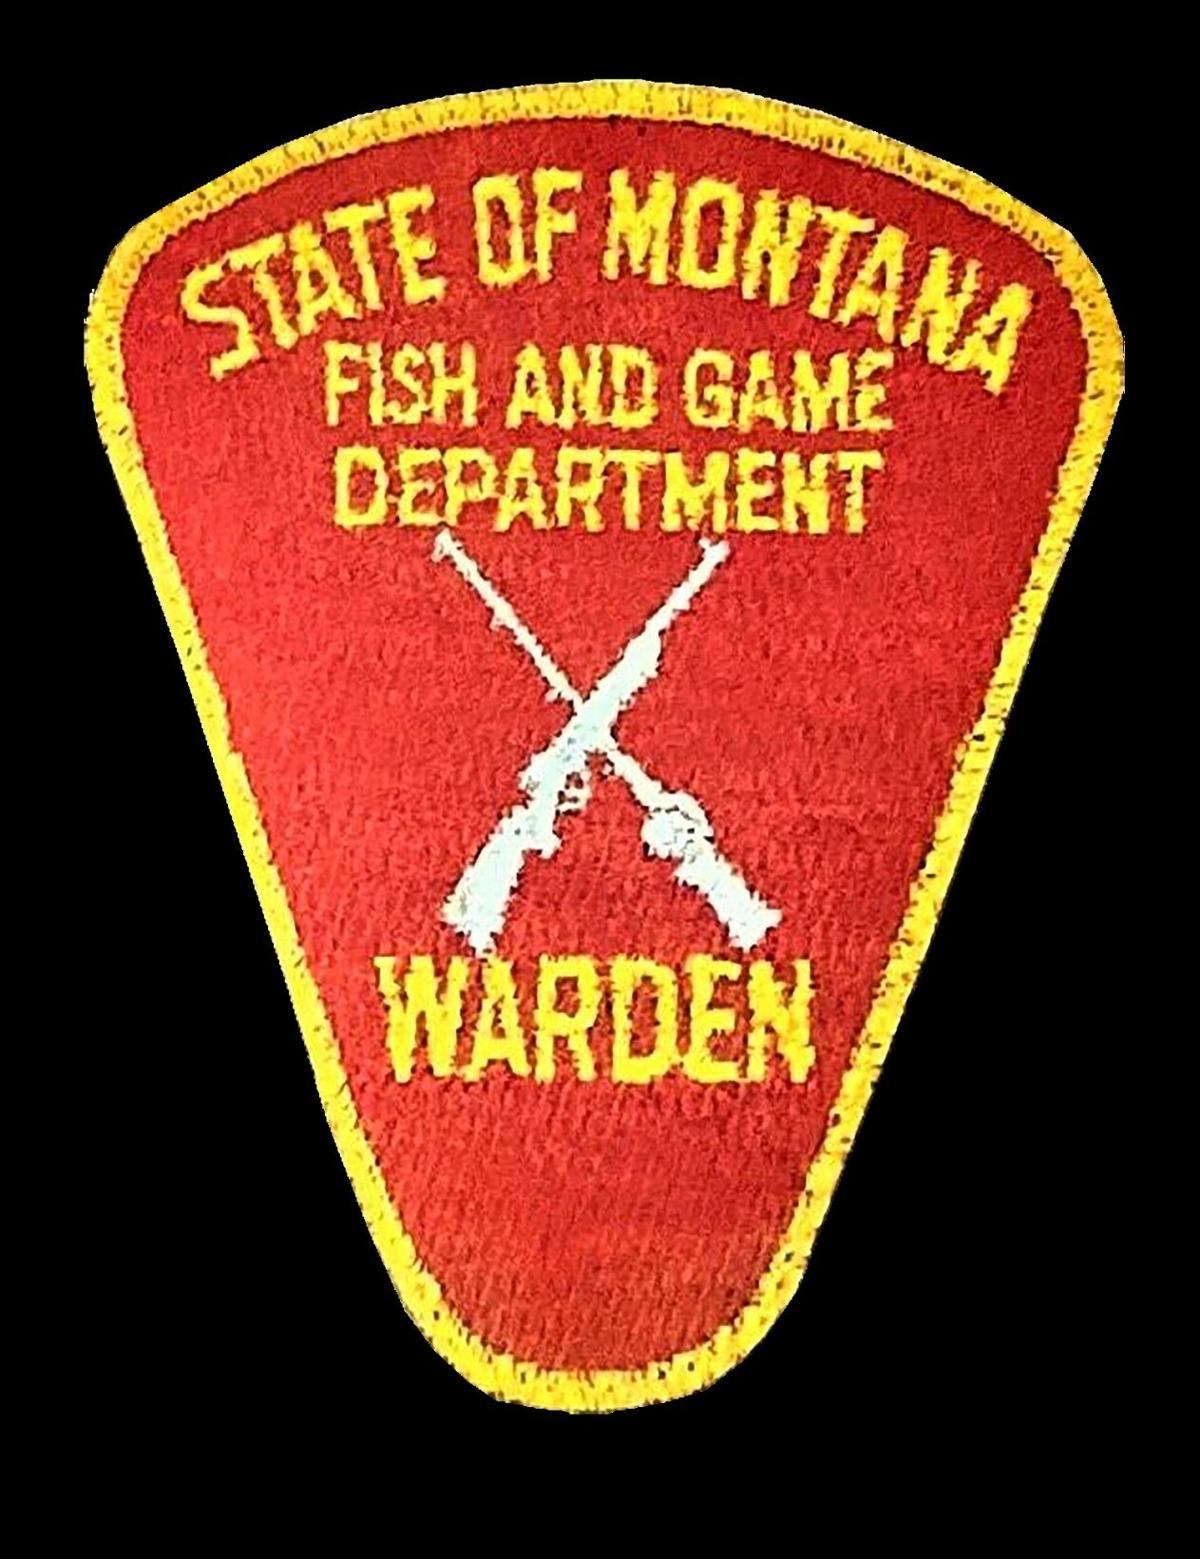 Hours, pay not worth the stress, many Montana game wardens say